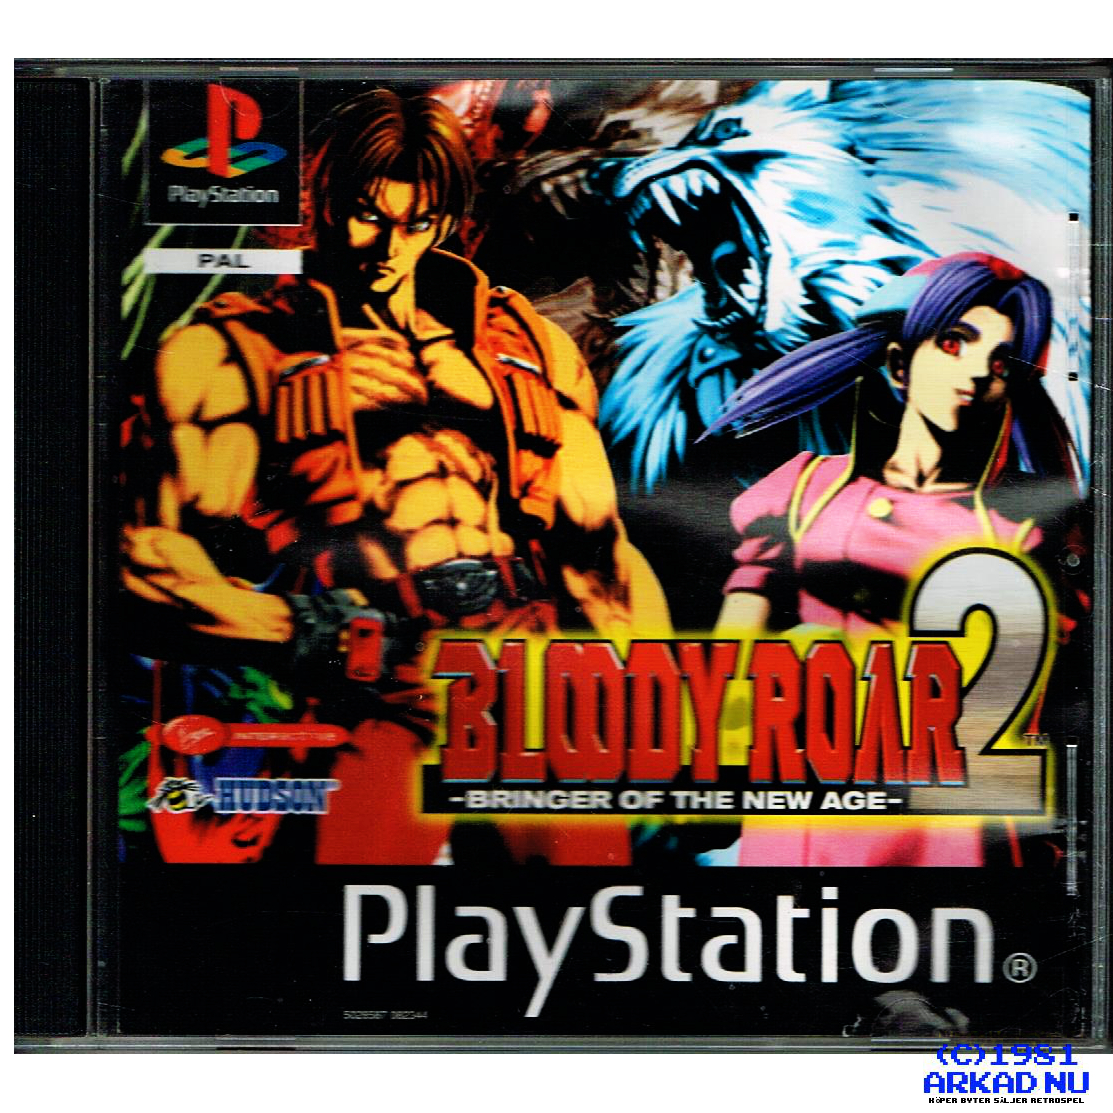 Bloody roar 2 psx save game